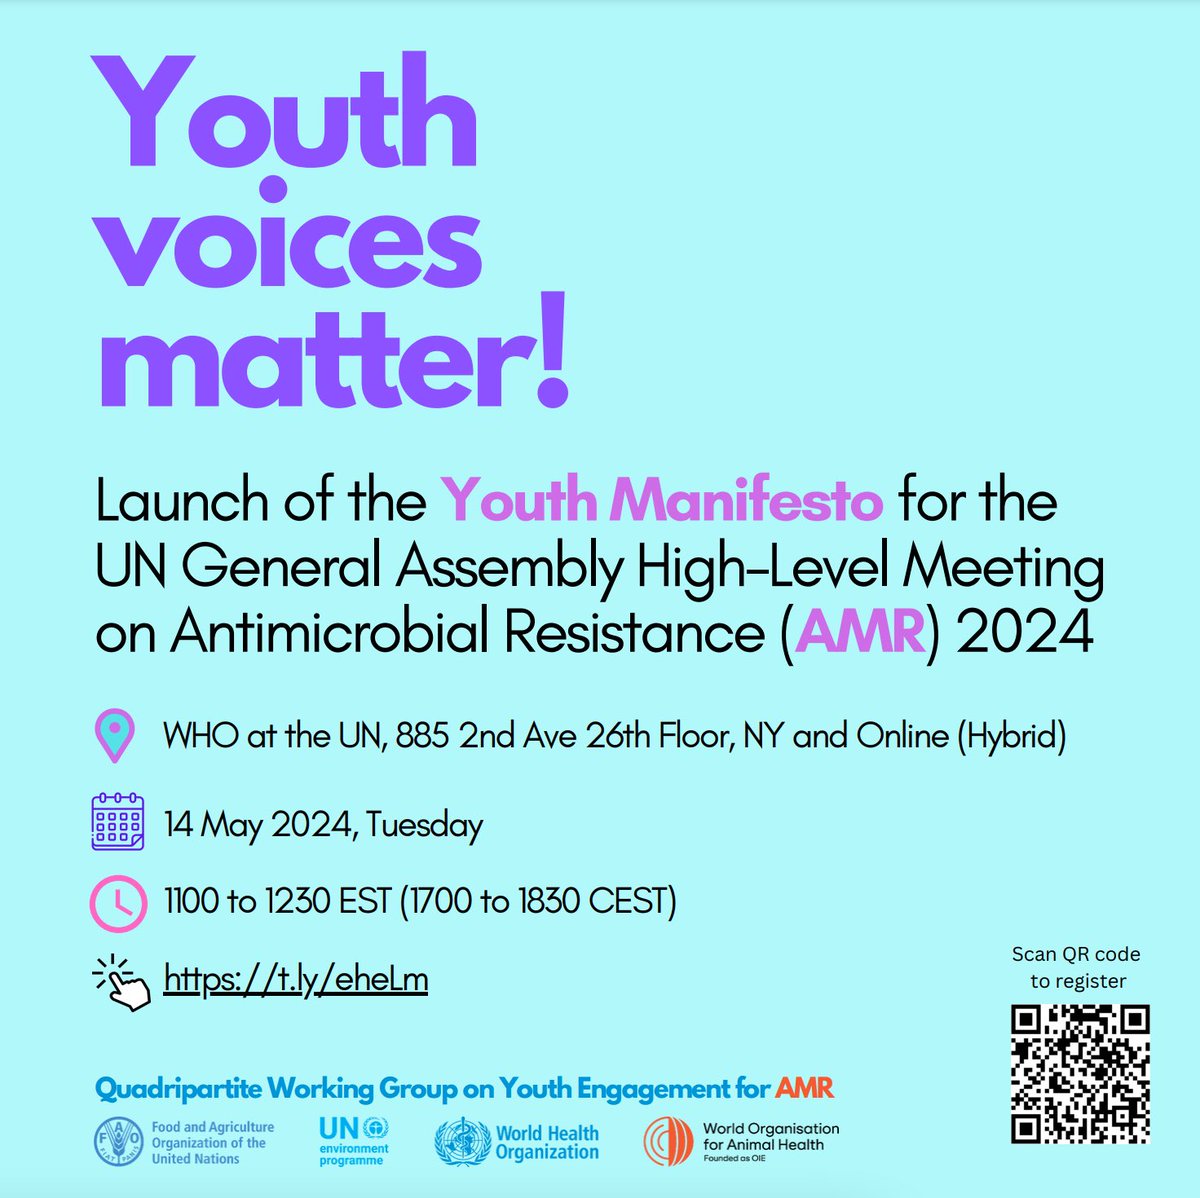 Young leaders worldwide are setting priorities and spurring action to tackle antimicrobial resistance. 

The Youth Manifesto for the #UNGA High-Level Meeting on #AMR launches on Tuesday, highlighting how to drive awareness and advocate for effective solutions.

Register and join…